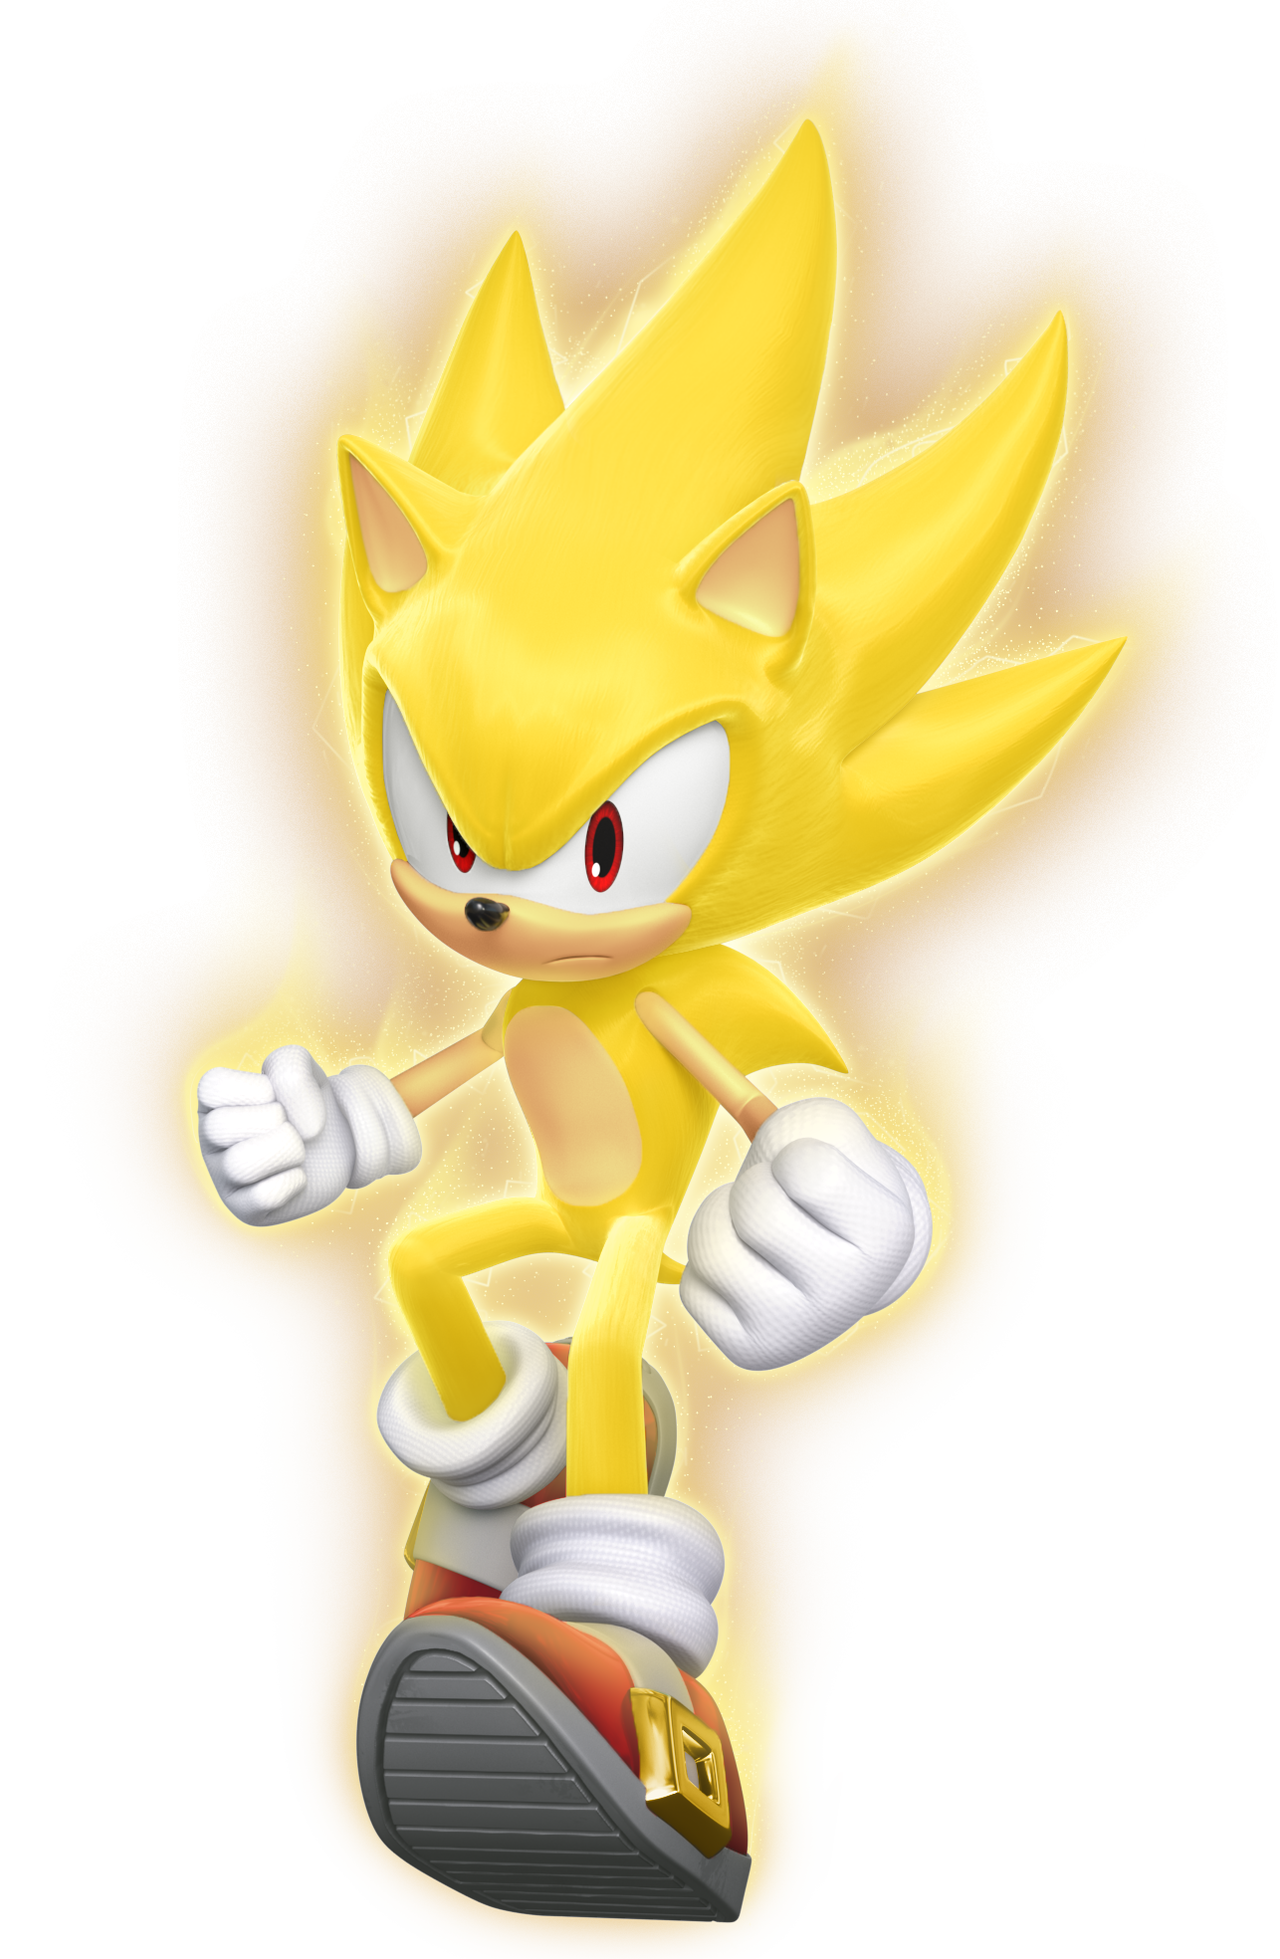 Mdp, sonic 3 D, Sonic 3, k 9, Supersonic speed, Super Shadow